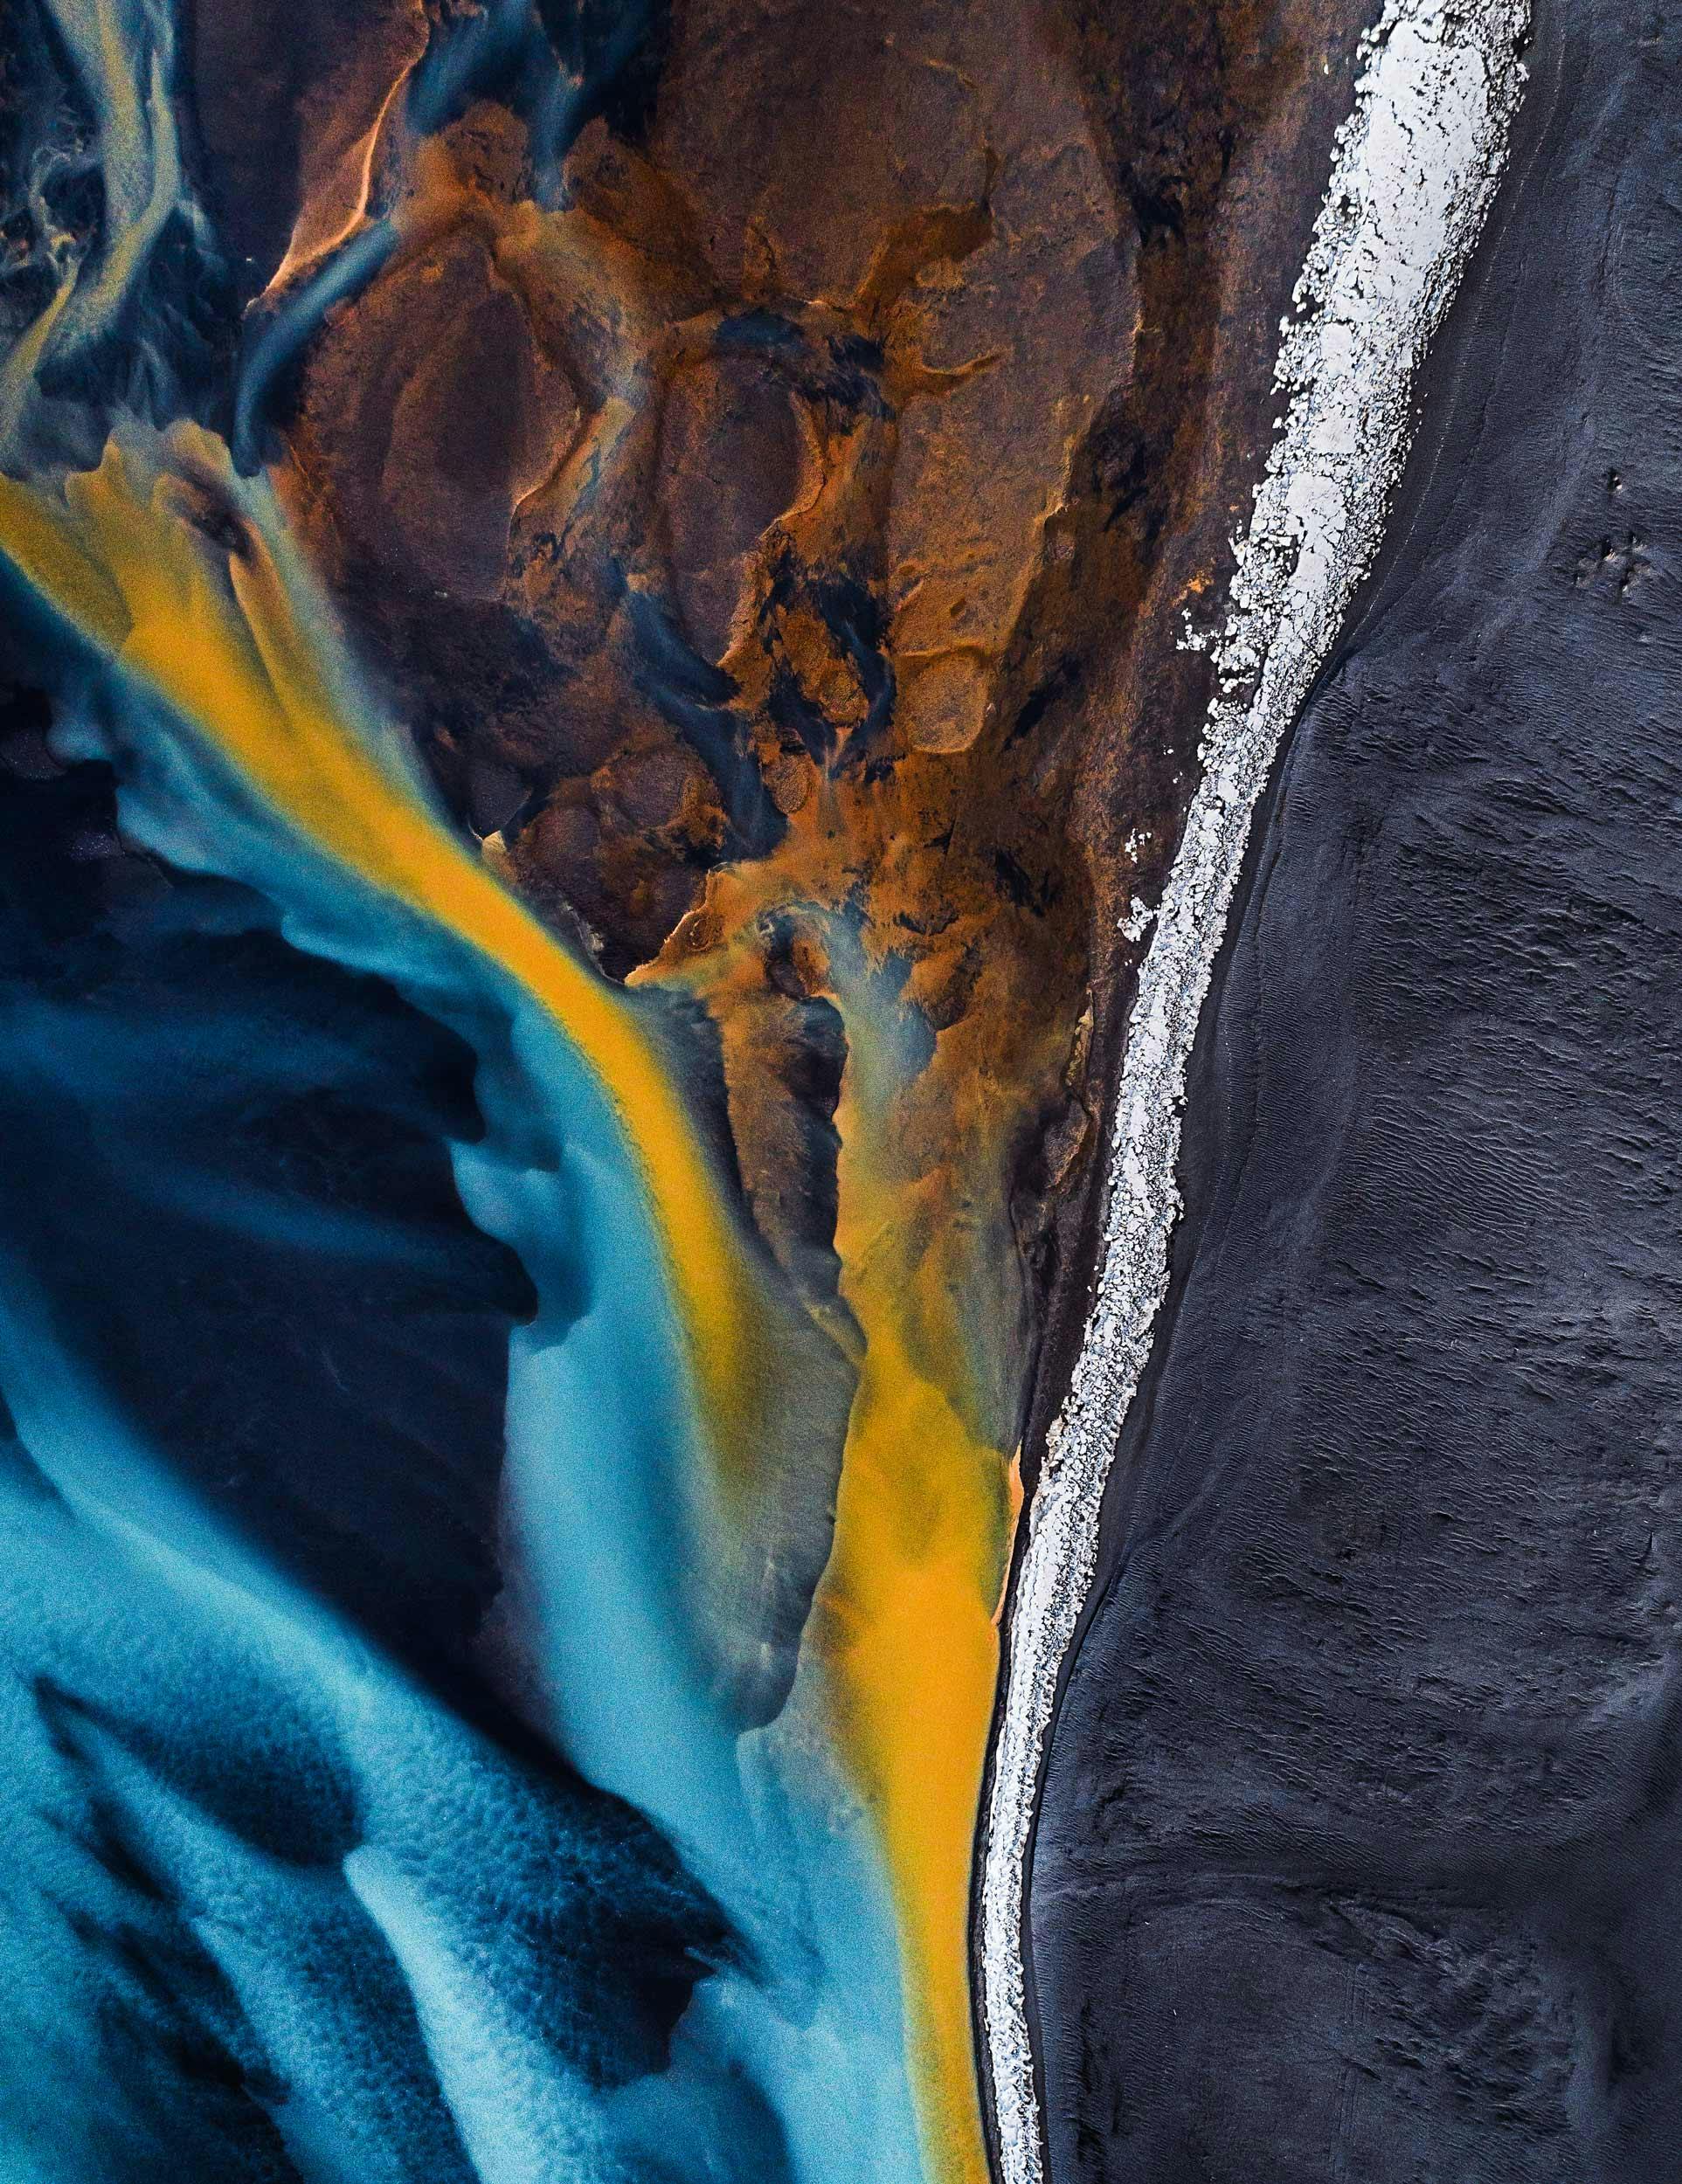 Aerial shot looking down on a braided river at the edge of a black sand beach, Iceland.